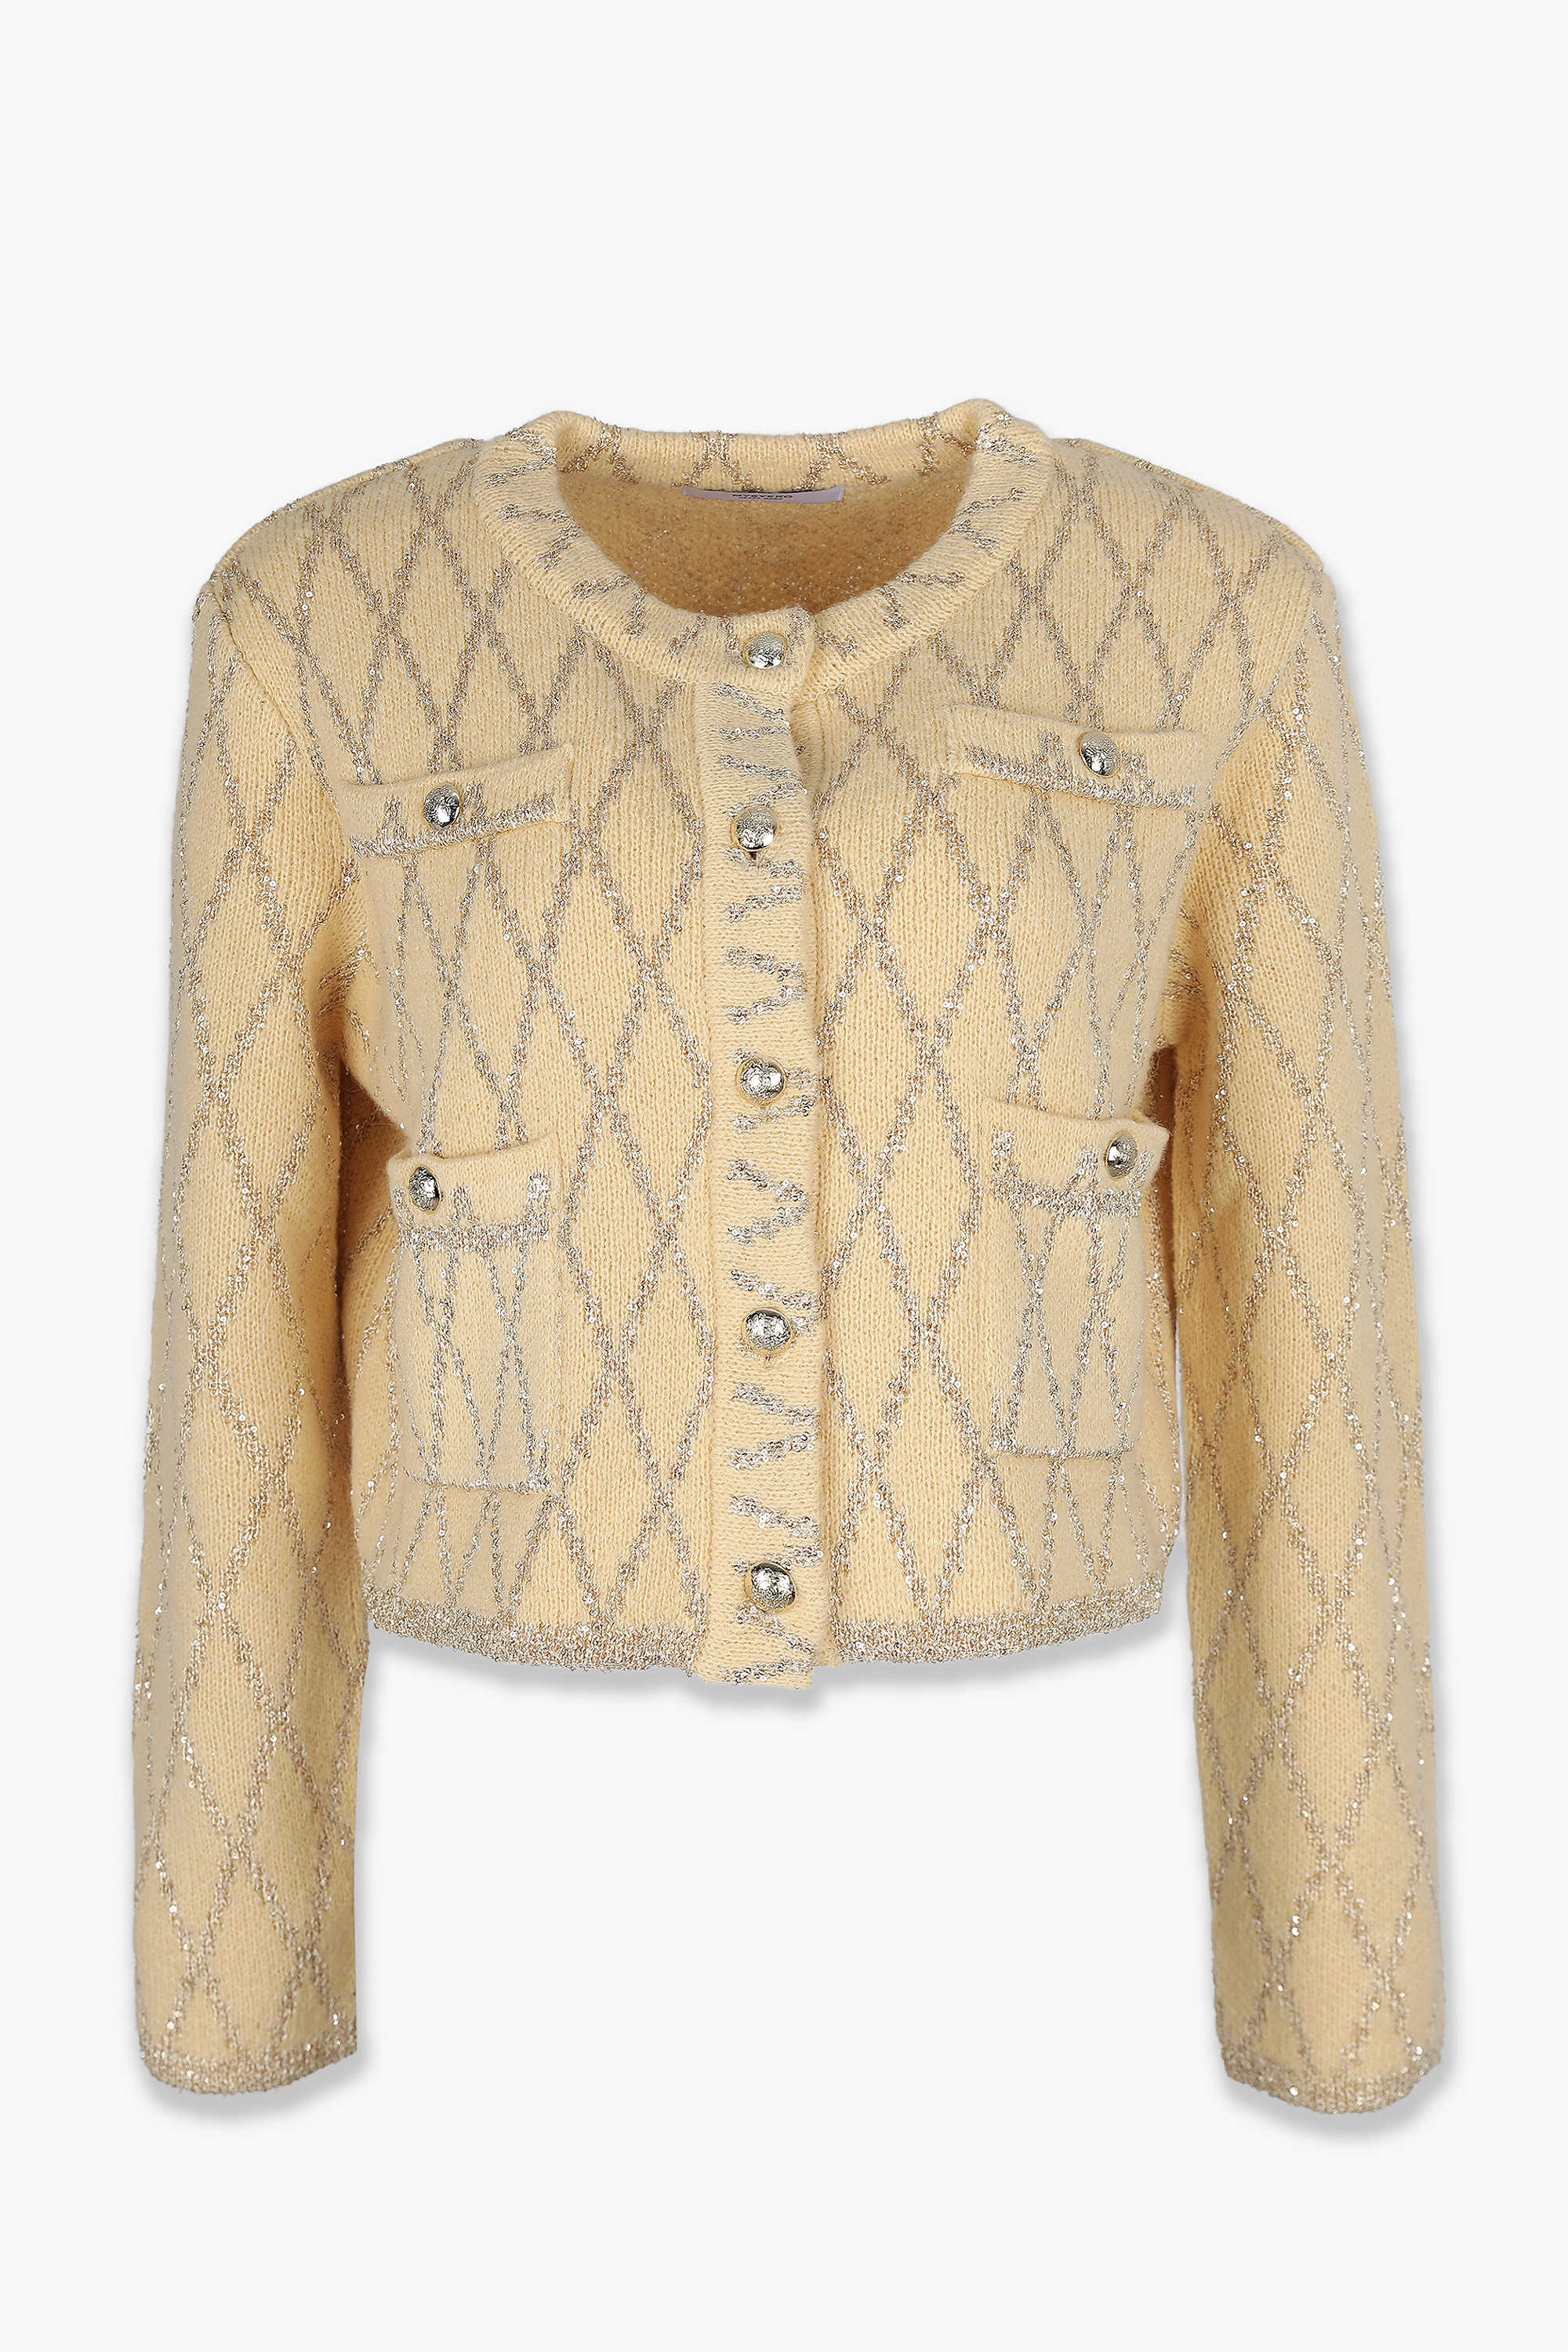 HIGH QUALITY LINE - MYEYEKO 23 SPRING COLLECTION / SEQUIN DIA KNIT JACKET (BUTTER YELLOW)  Reorder